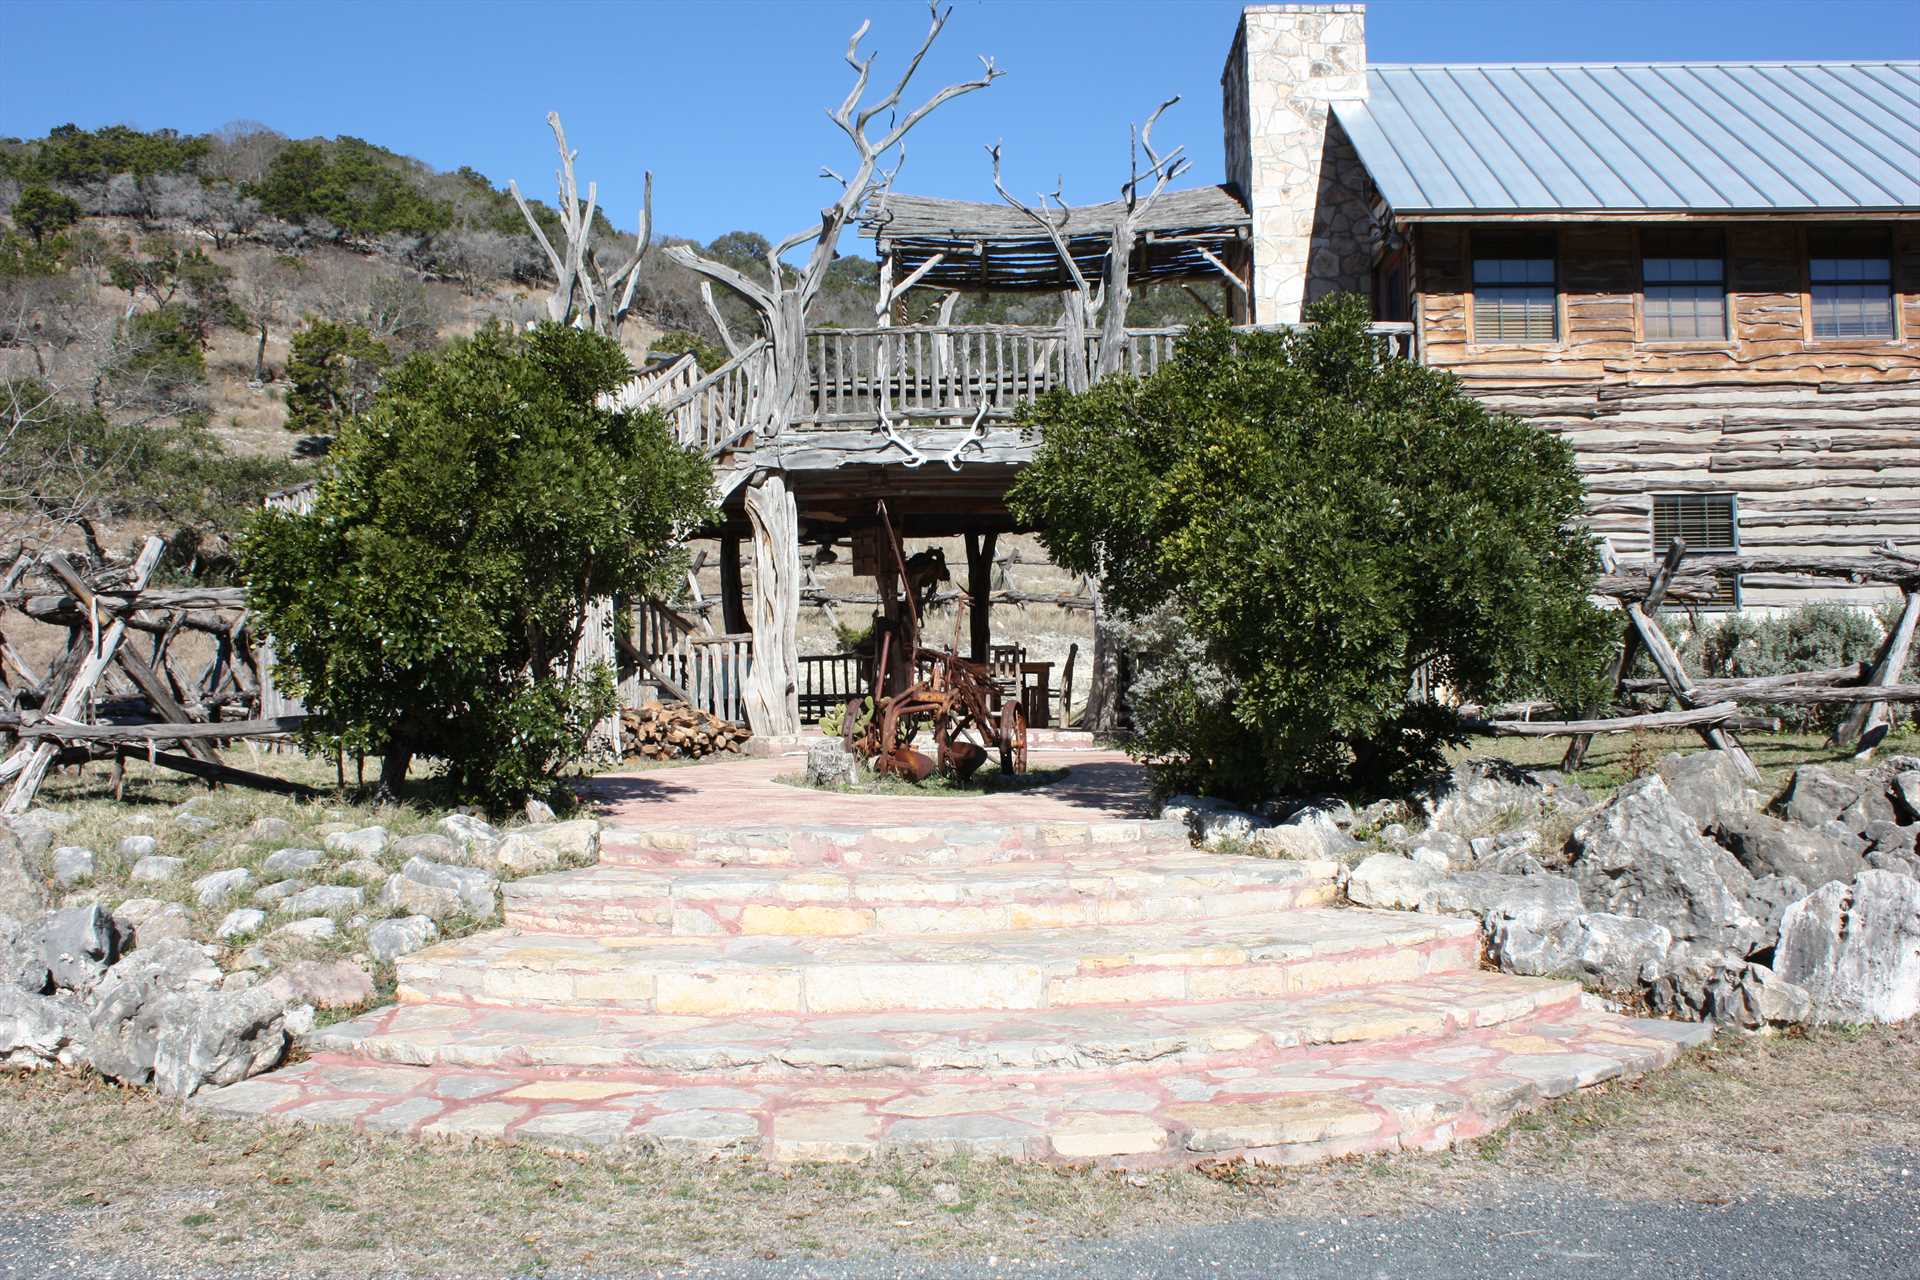                                                 Immaculate grounds and rustic western lodge atmosphere greet you to this wonderful Hill Country hideaway!